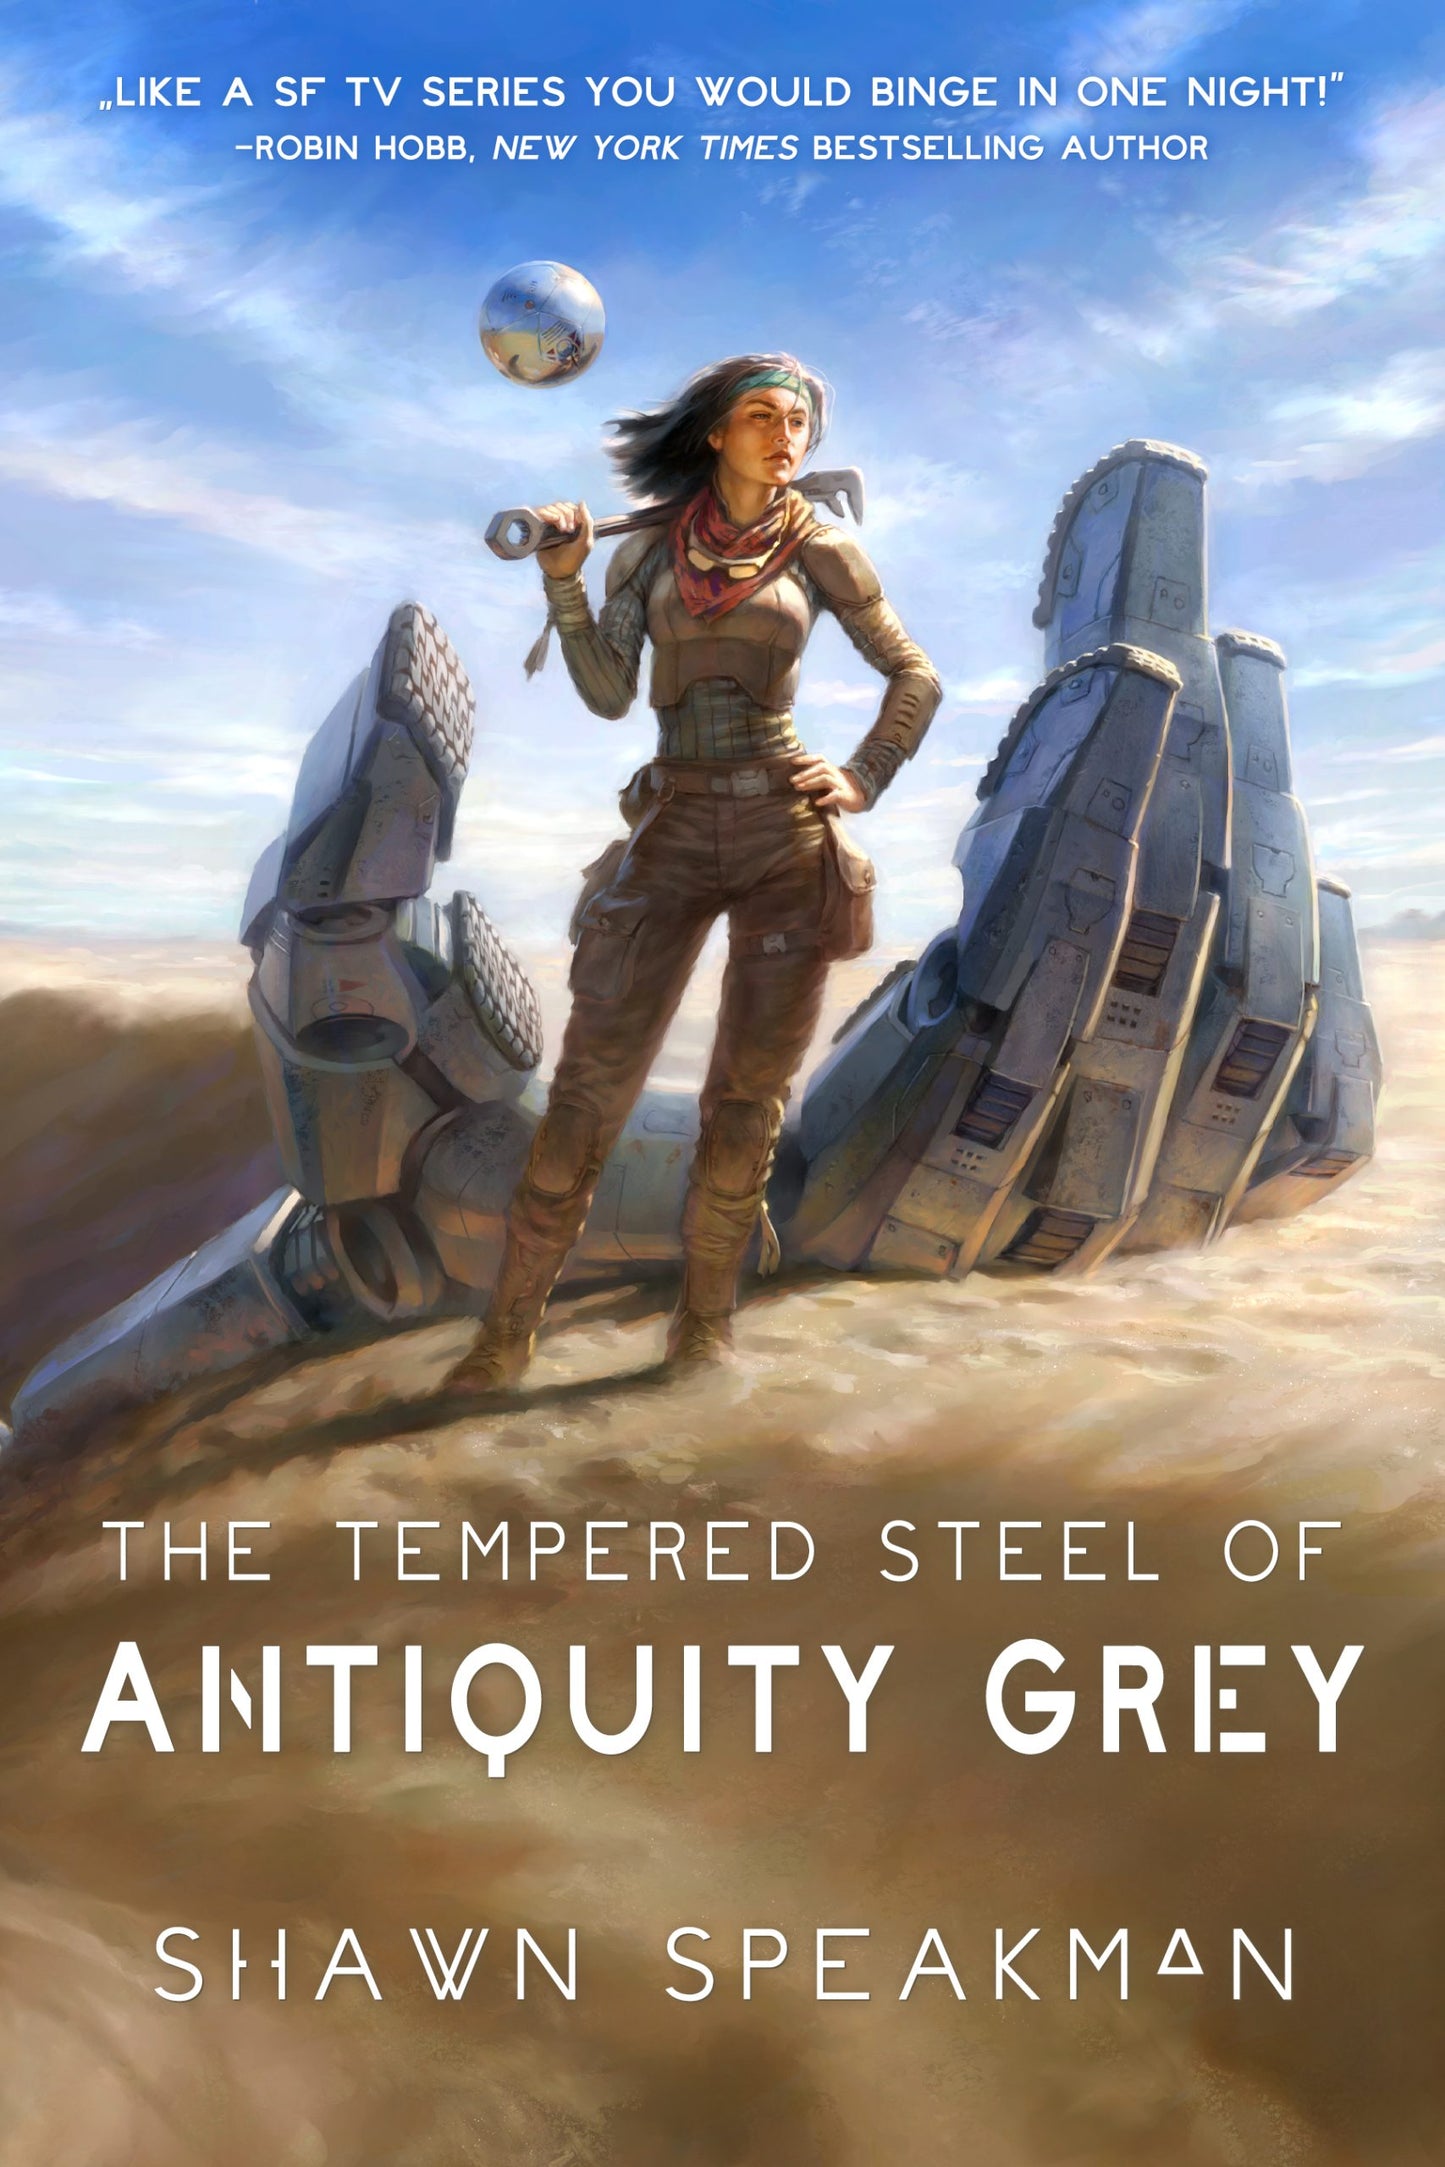 The Tempered Steel of Antiquity Grey by Shawn Speakman